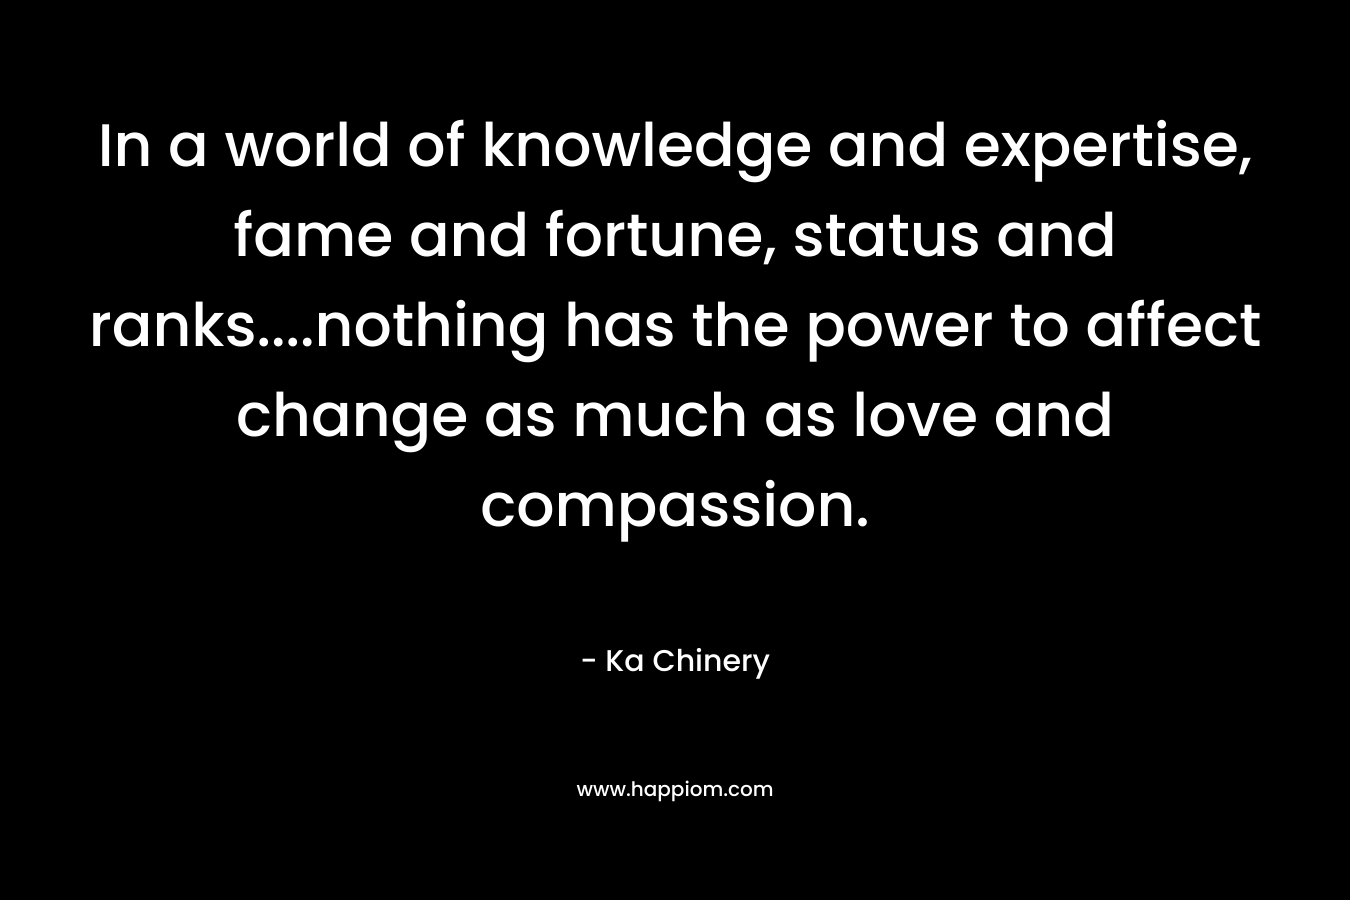 In a world of knowledge and expertise, fame and fortune, status and ranks....nothing has the power to affect change as much as love and compassion.